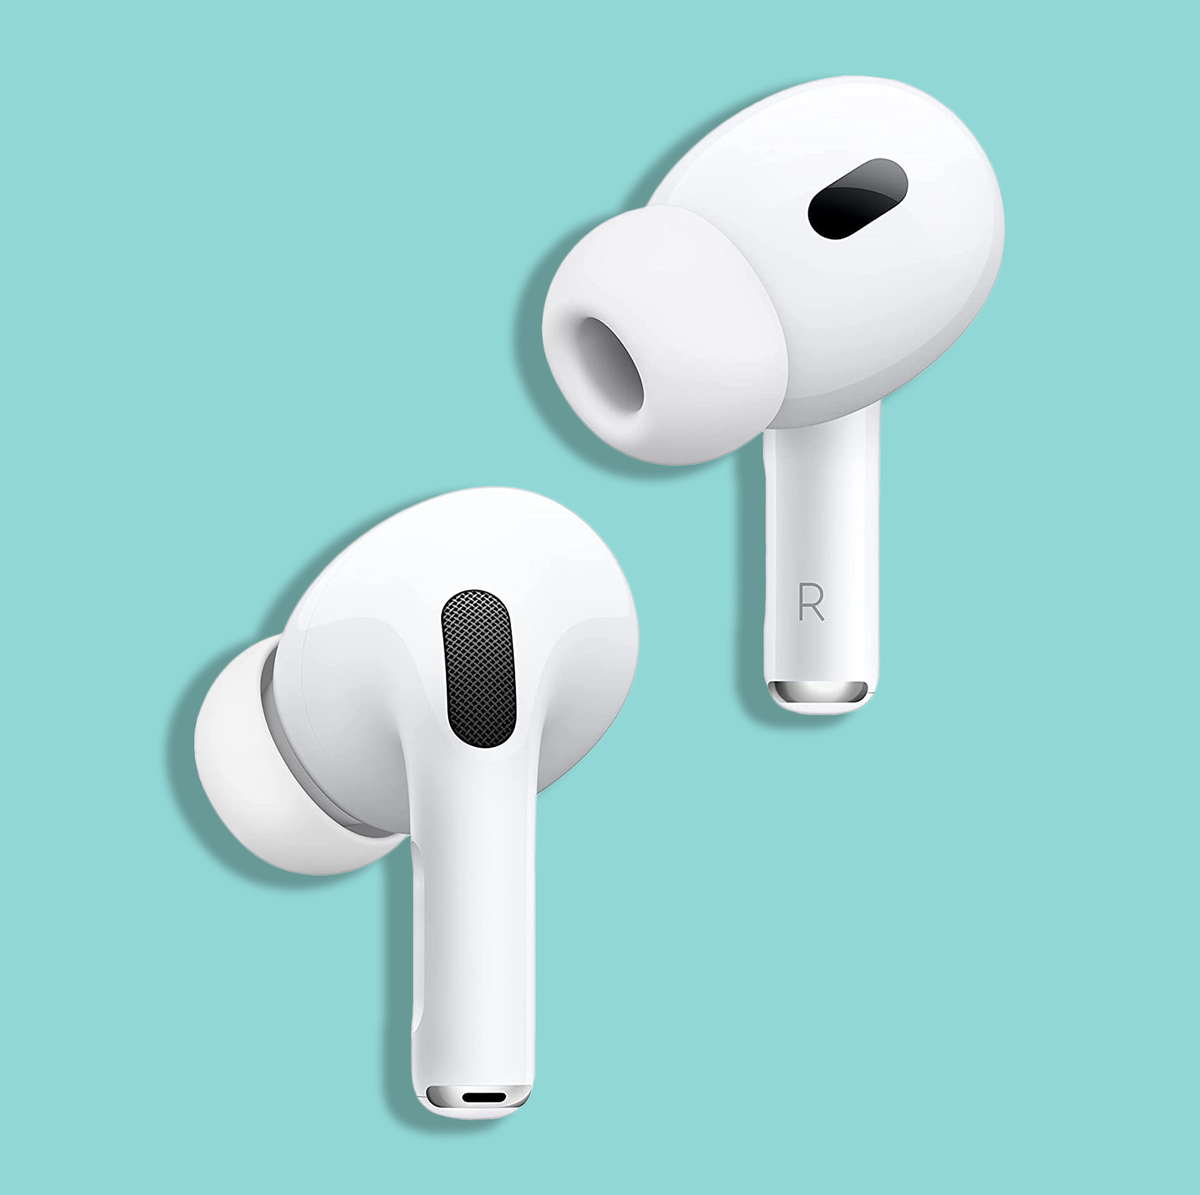 Can the AirPods Pro Protect Your Hearing? We Put Them to the Test